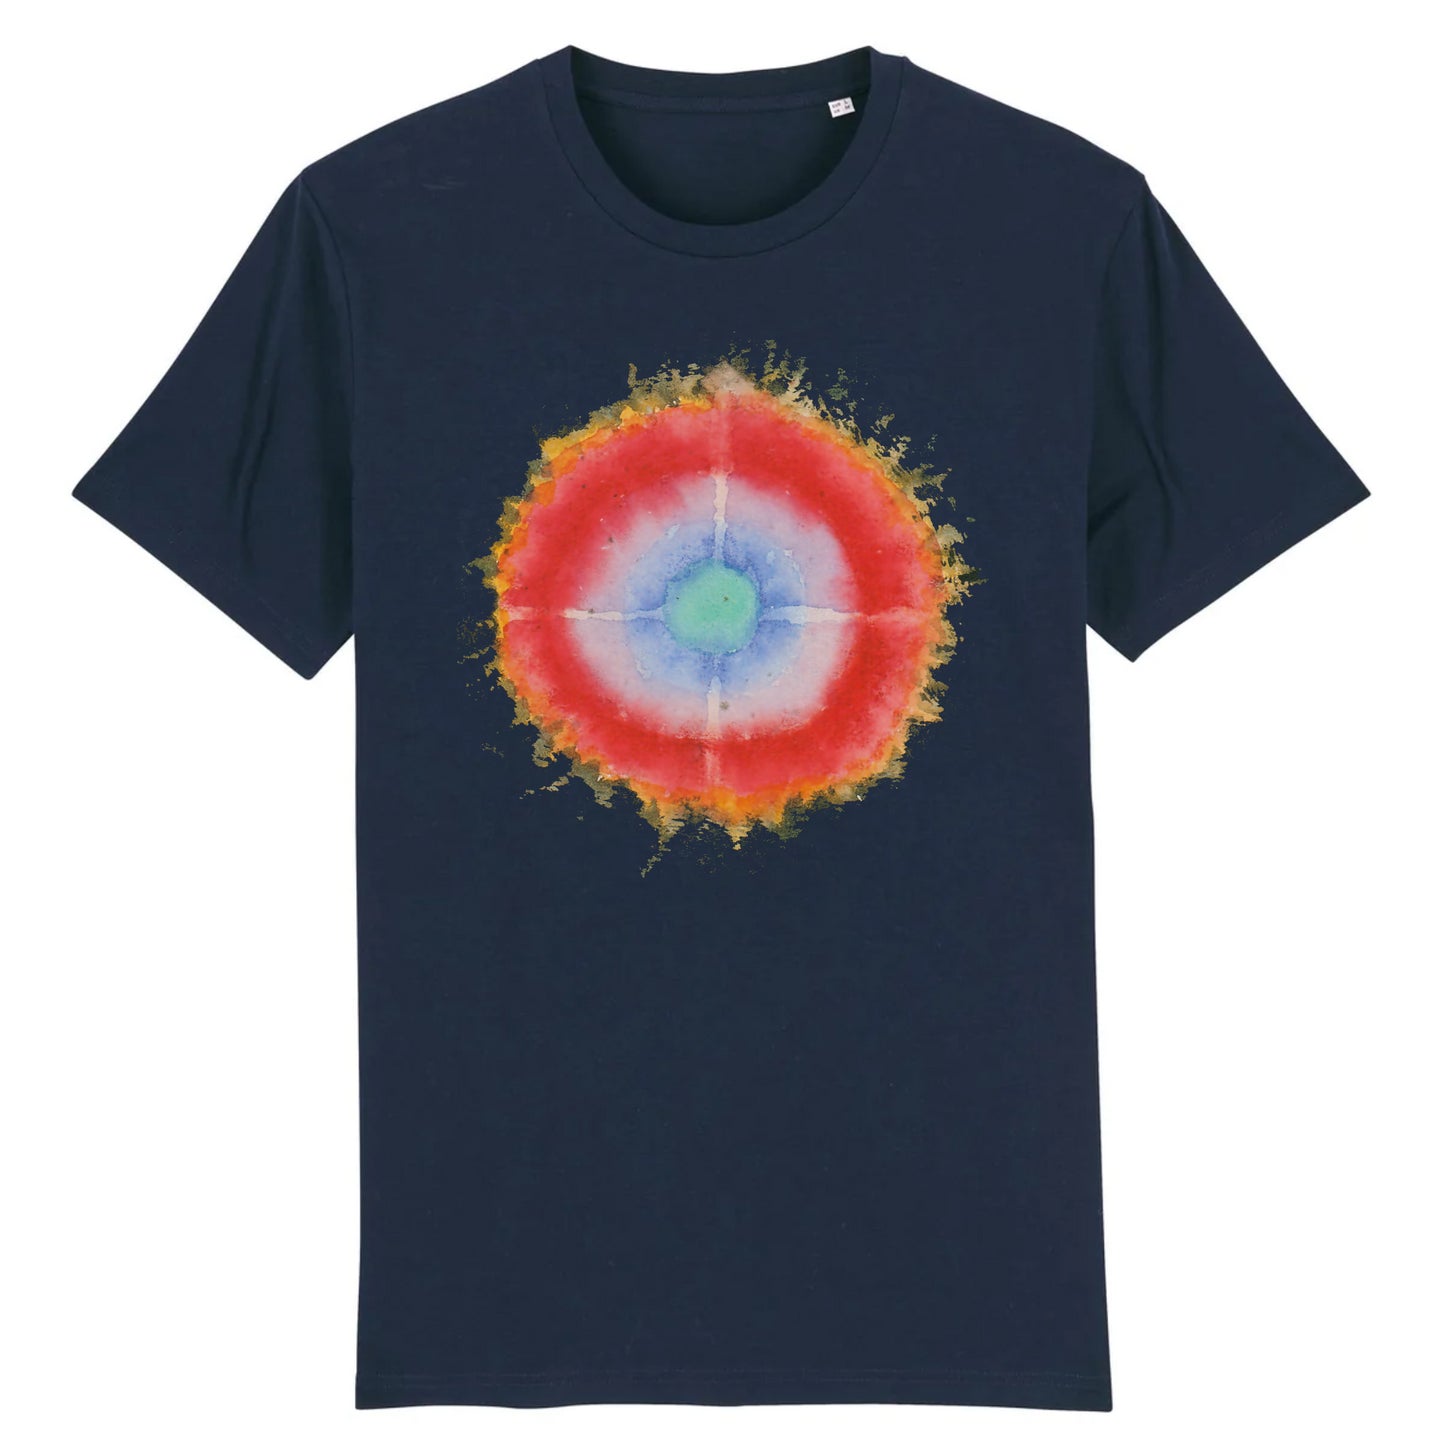 Design based on 'Untitled (On the Viewing of Flowers and Trees Series)' by Hilma af Klint, 1922 - Organic Cotton T-Shirt